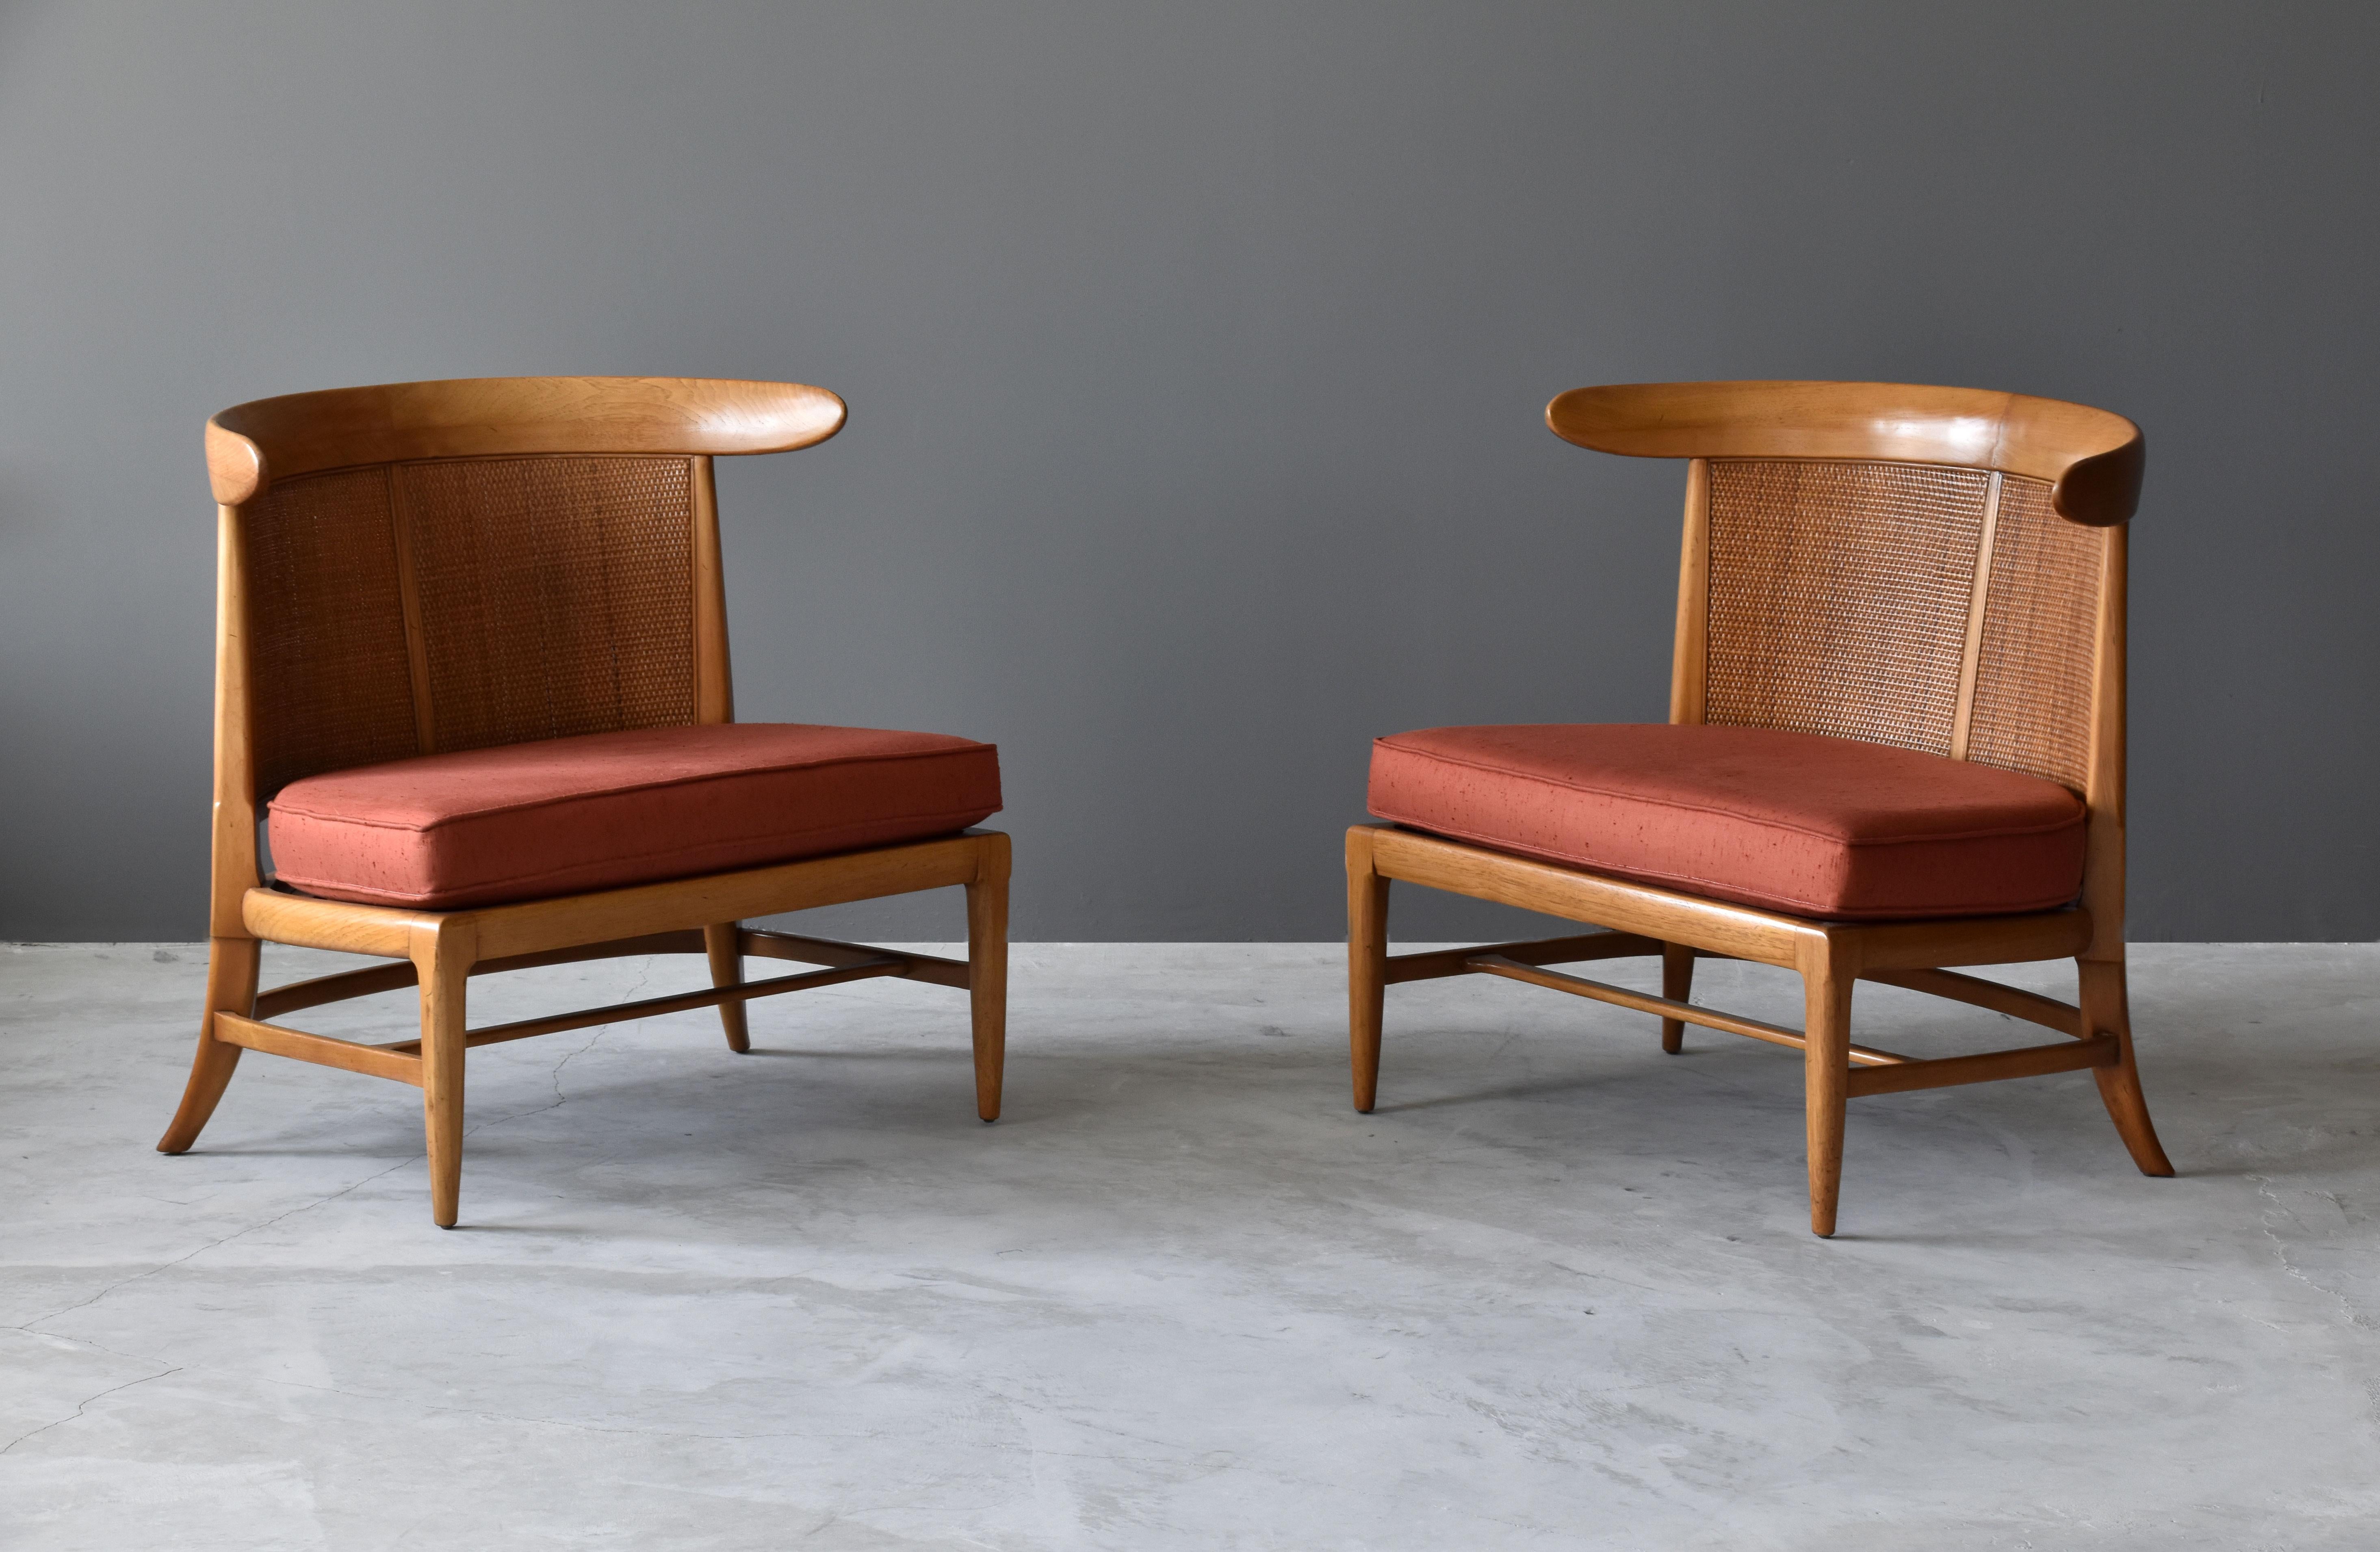 A pair of walnut lounge chairs with original cane/rattan braided backs and fabric cushions. Designed by John Lubberts & Lambert Mulder for Tomlinson collection, America, circa 1950.

Other American designers of the era include Edward Wormley, T.H.